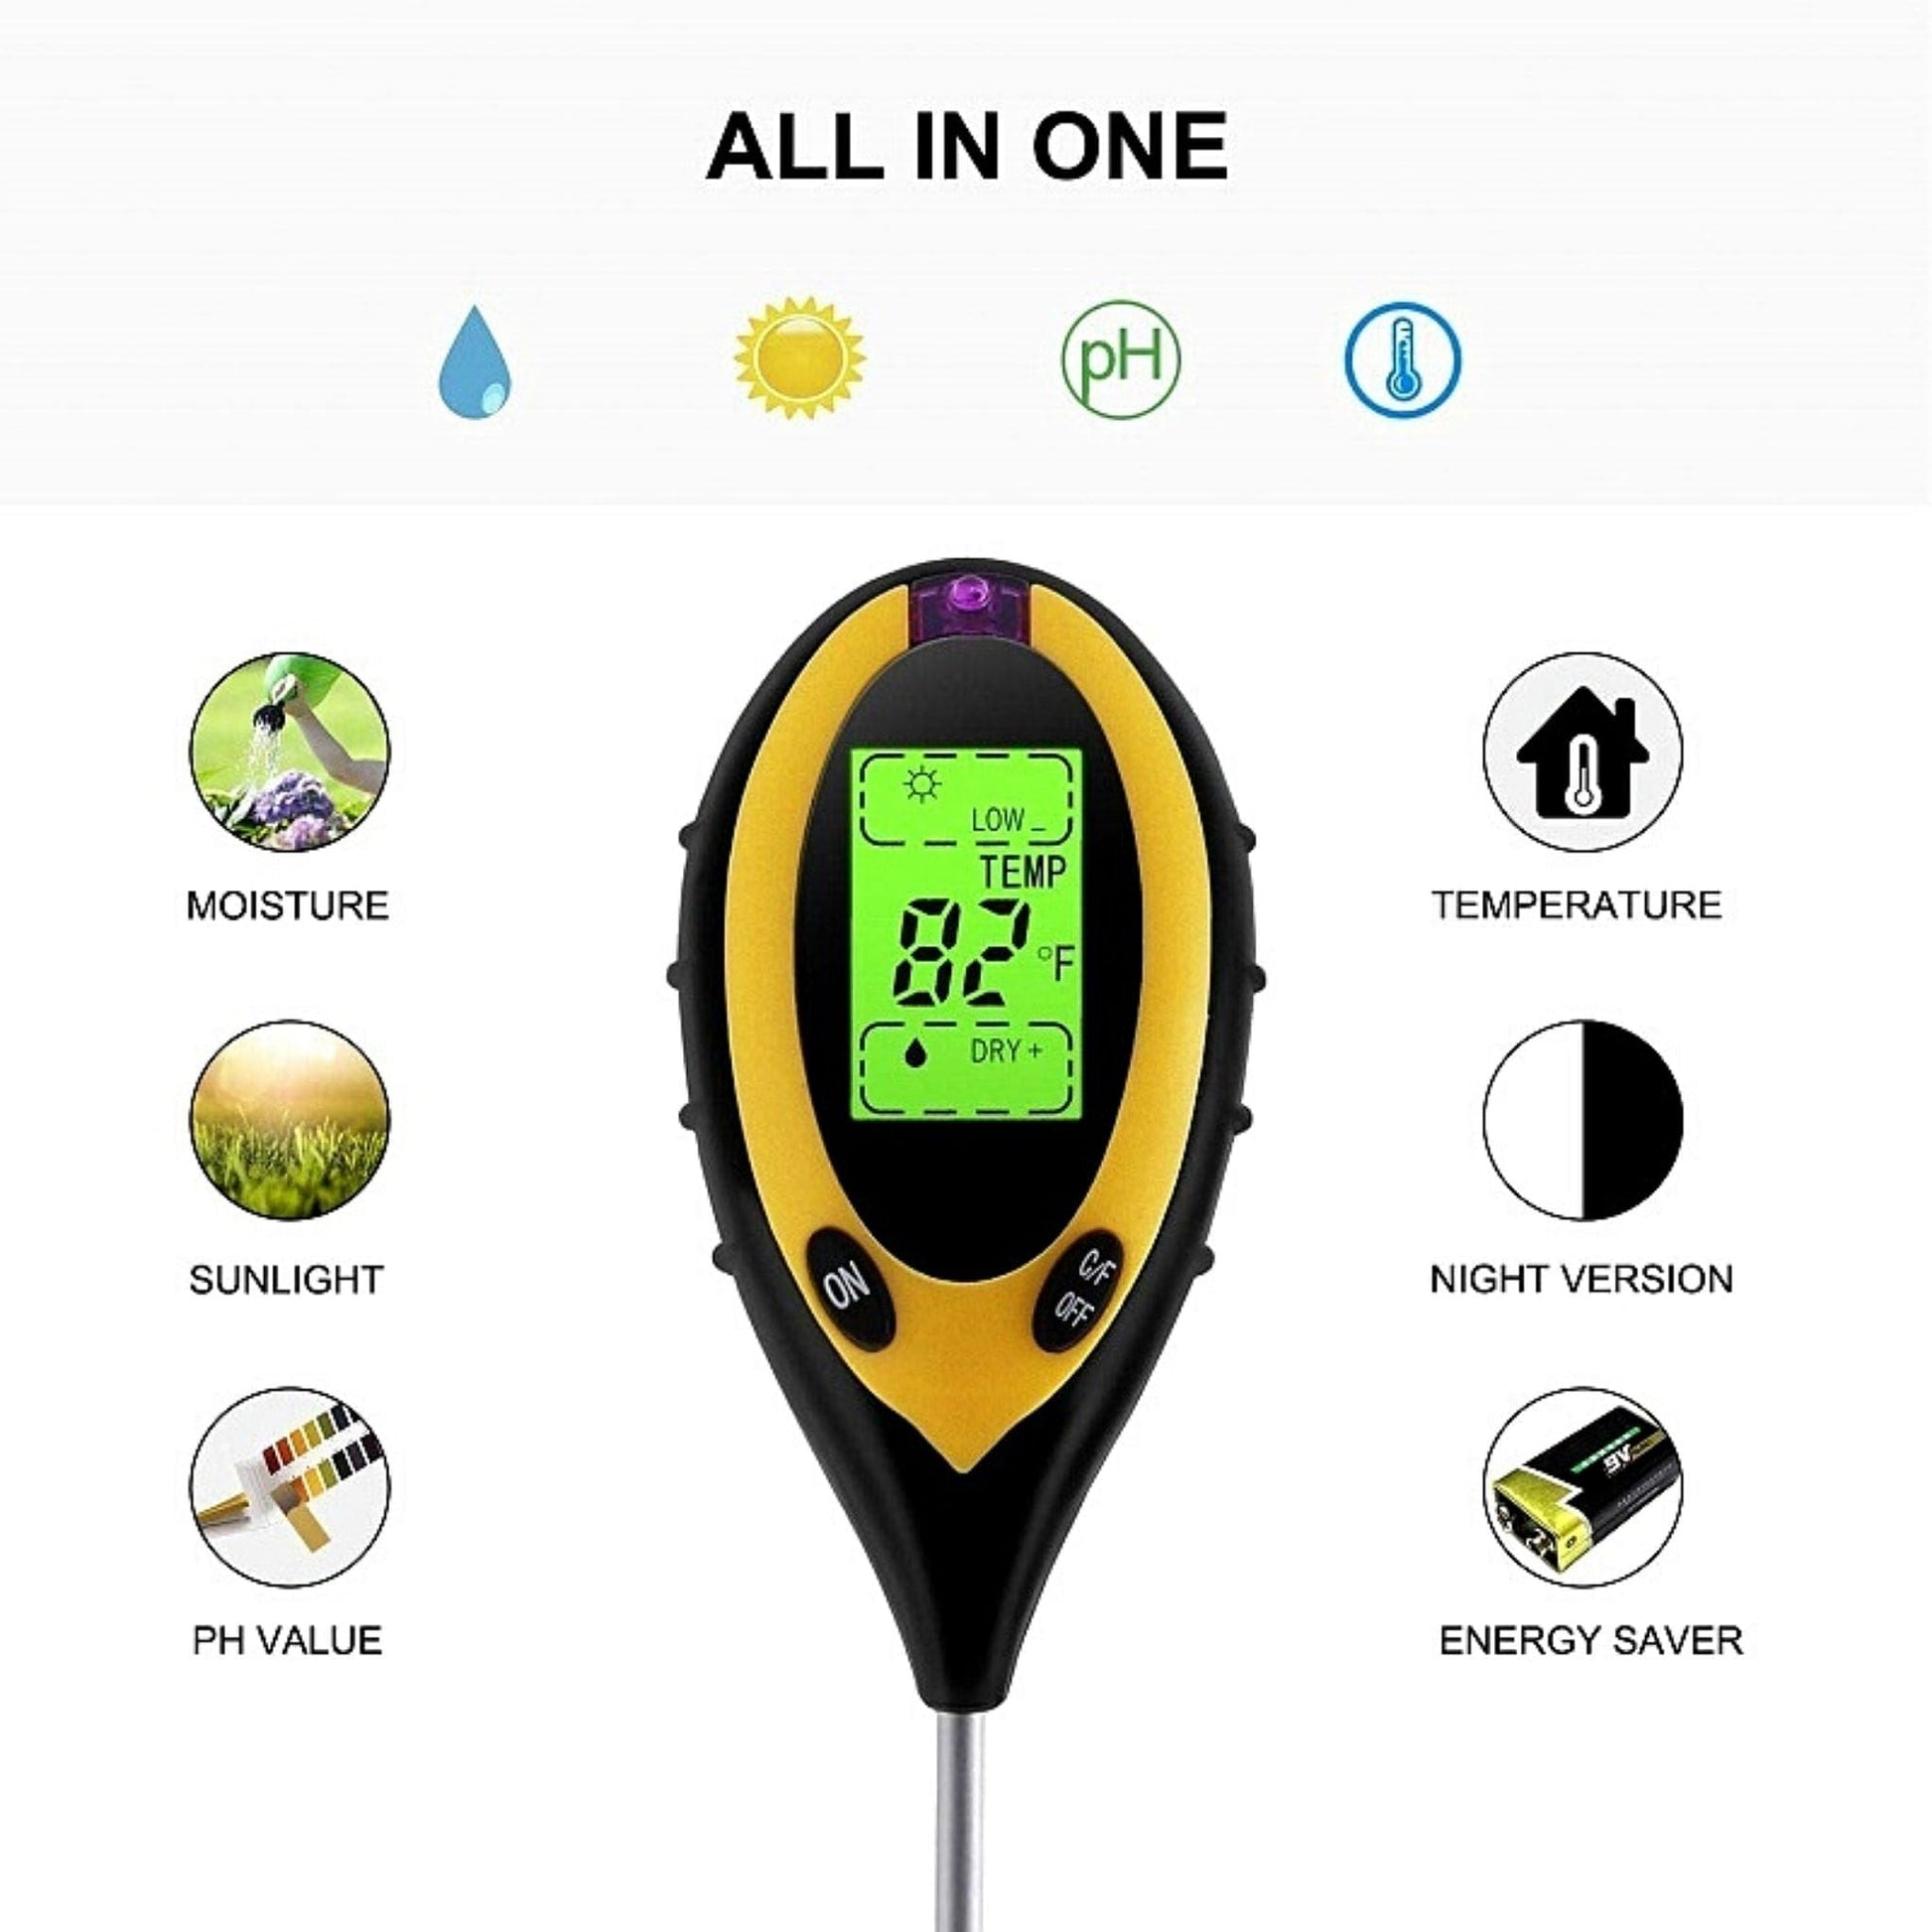 Digital Soil Thermometer 4-in-1 Soil Tester Soil Thermometer/Light/Air  Temperature/Air Humidity Meter Digital Soil/Plant Environment Survey  Instrument Sunlight Tester Plant Monitor 